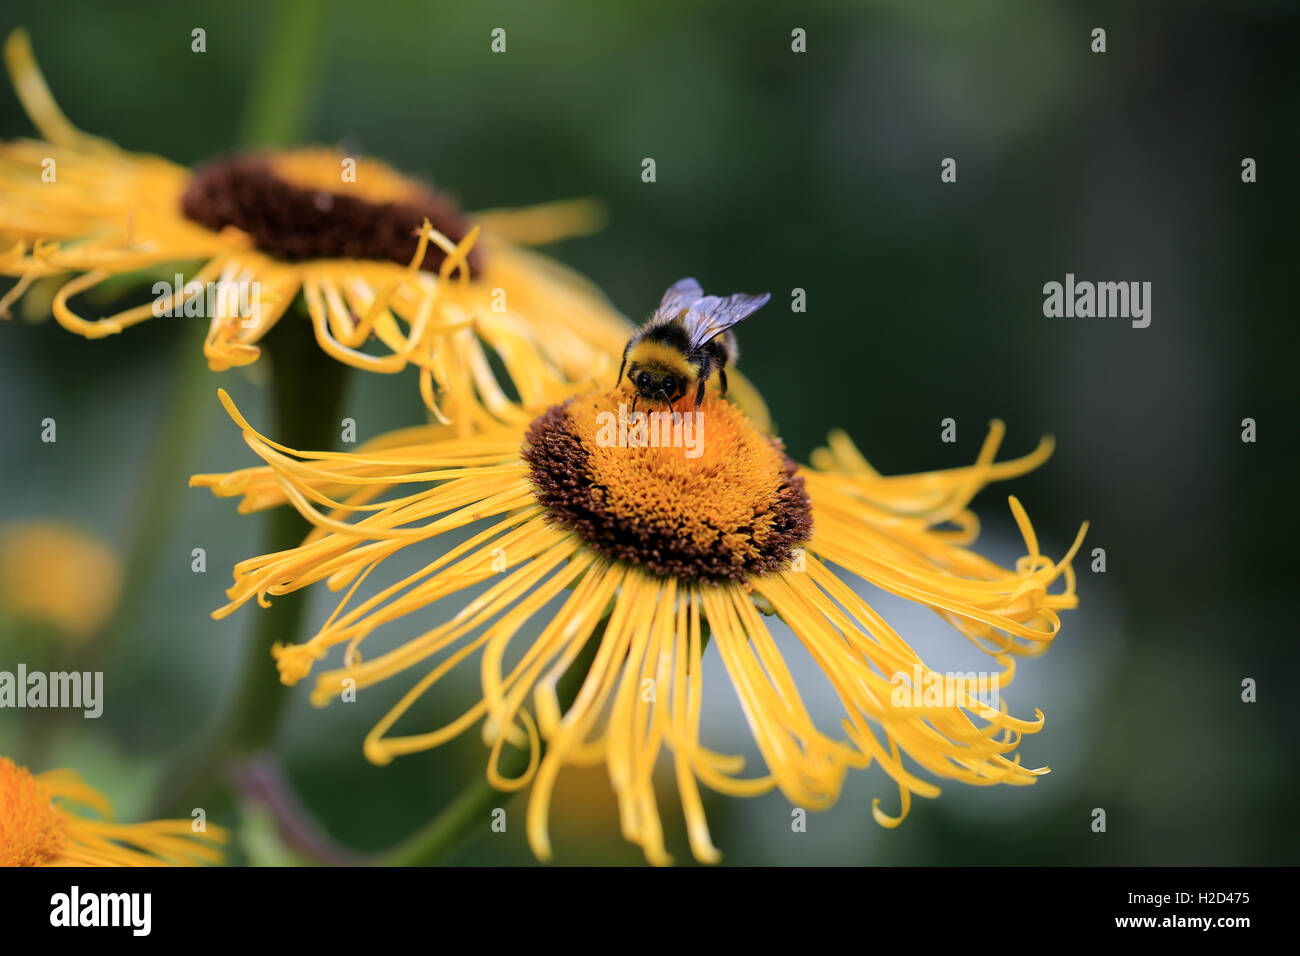 Giant Inula Helenium flowers with a bumblebee Stock Photo